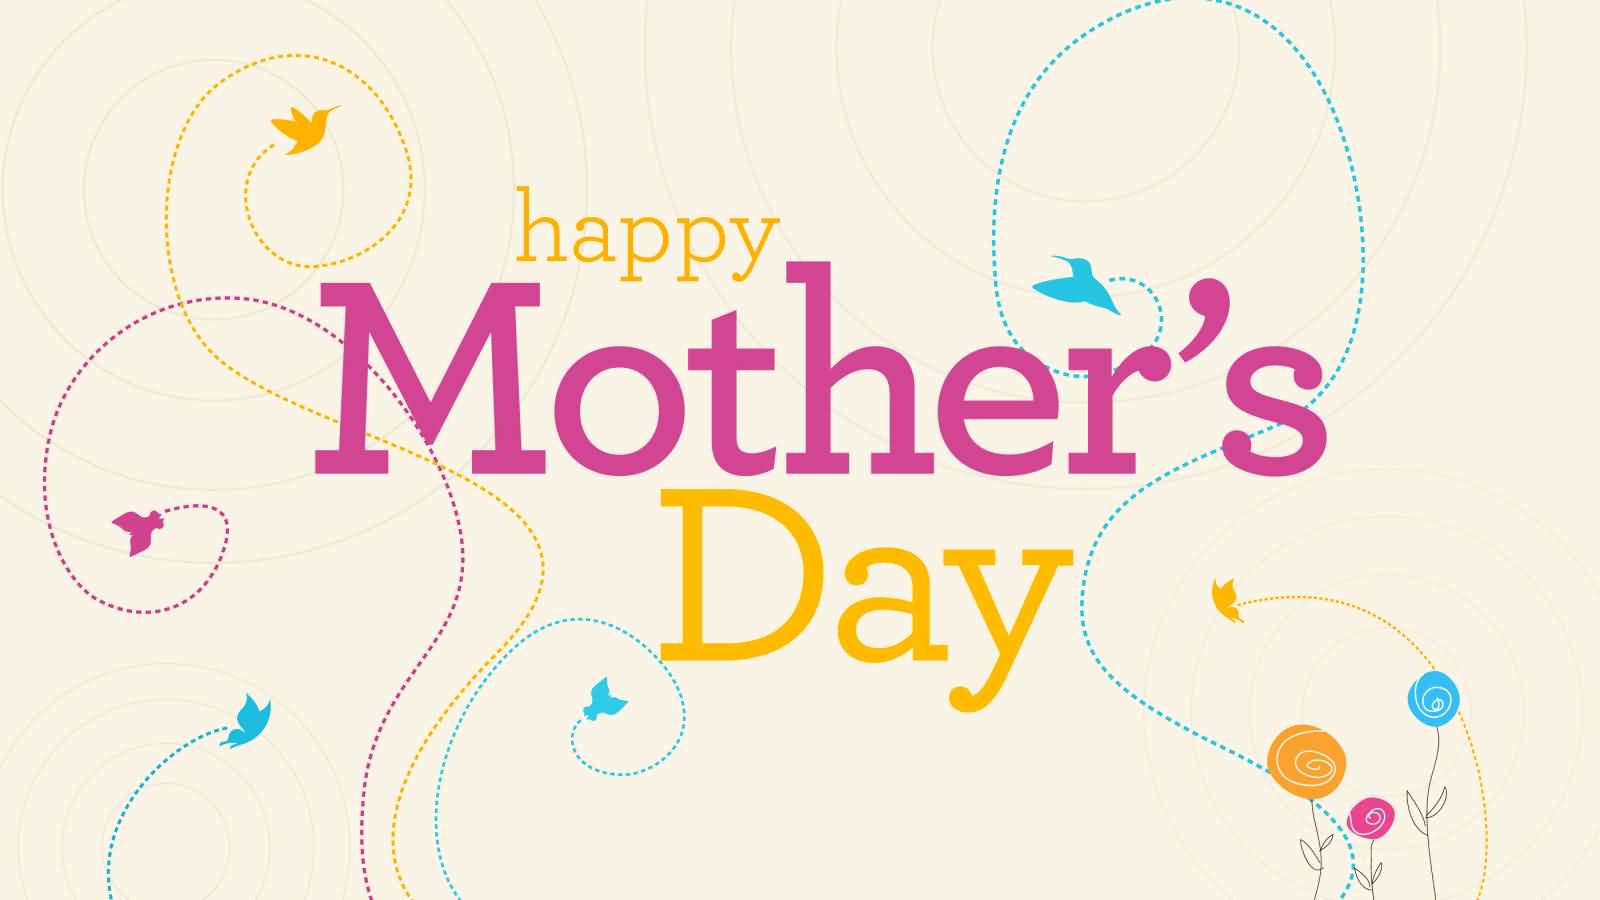 Happy Mother's Day 2017 Wishes Wallpaper